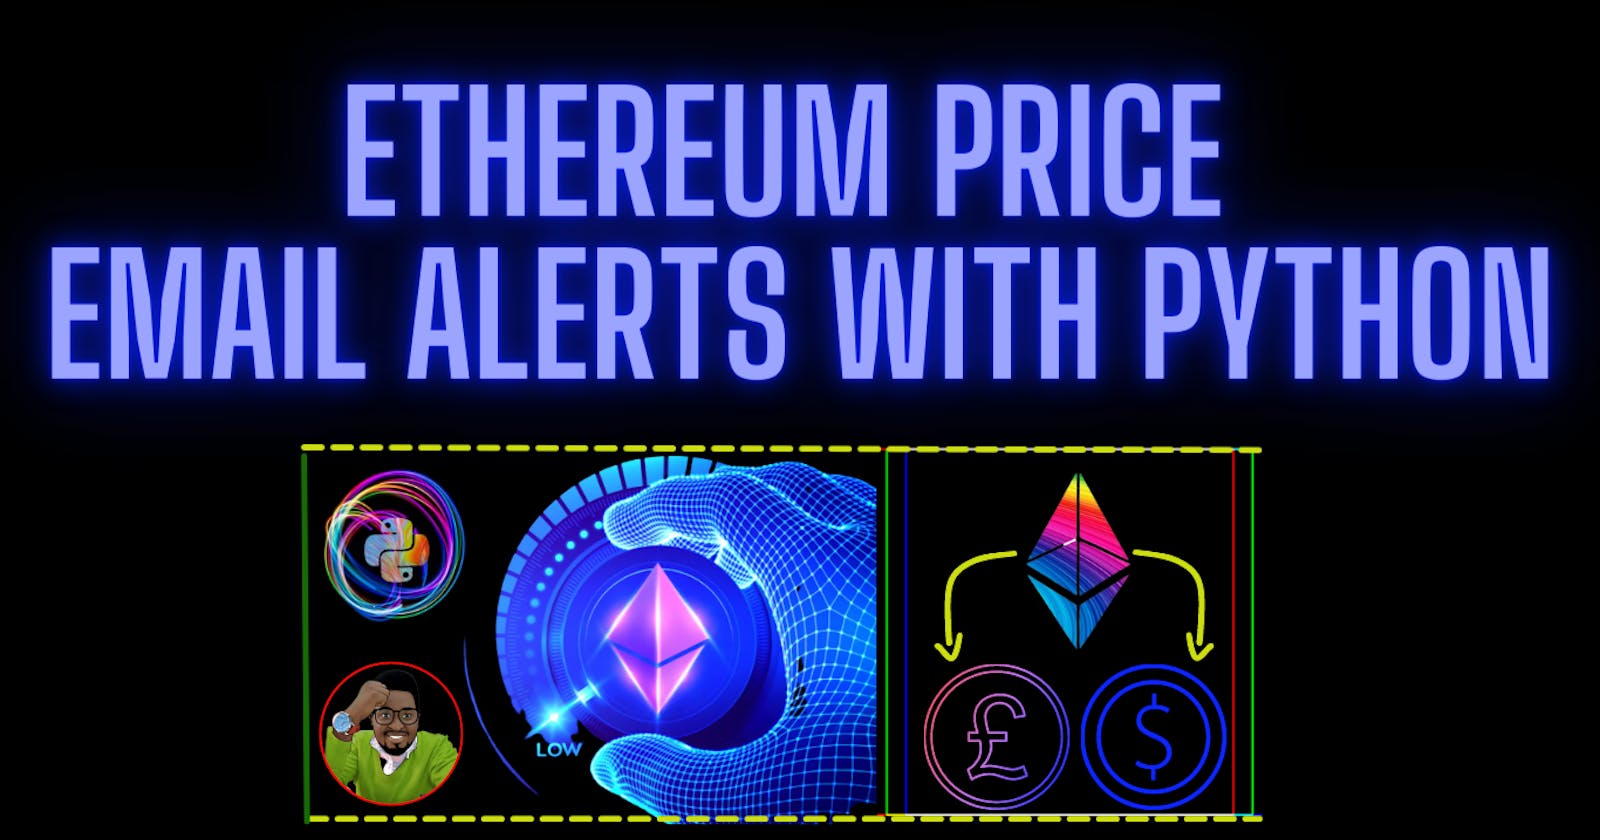 Ethereum Price Email Alerts With Python